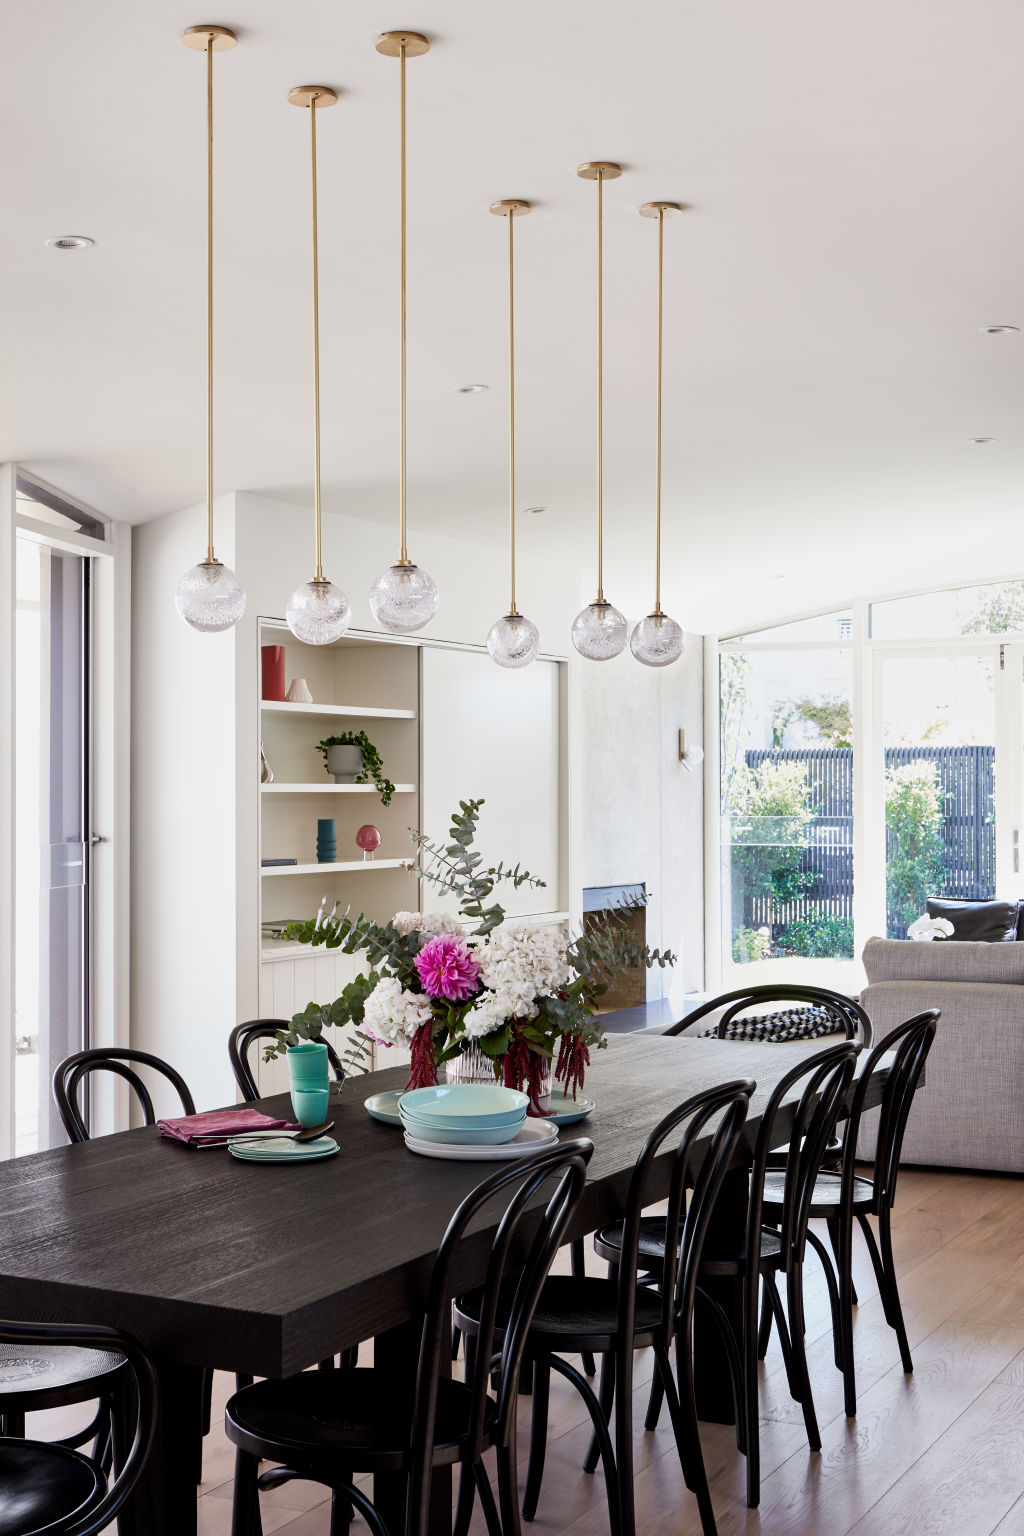 Statement lighting at The Curved House by The Retreat Stylist. Photo: Stephanie Rooney